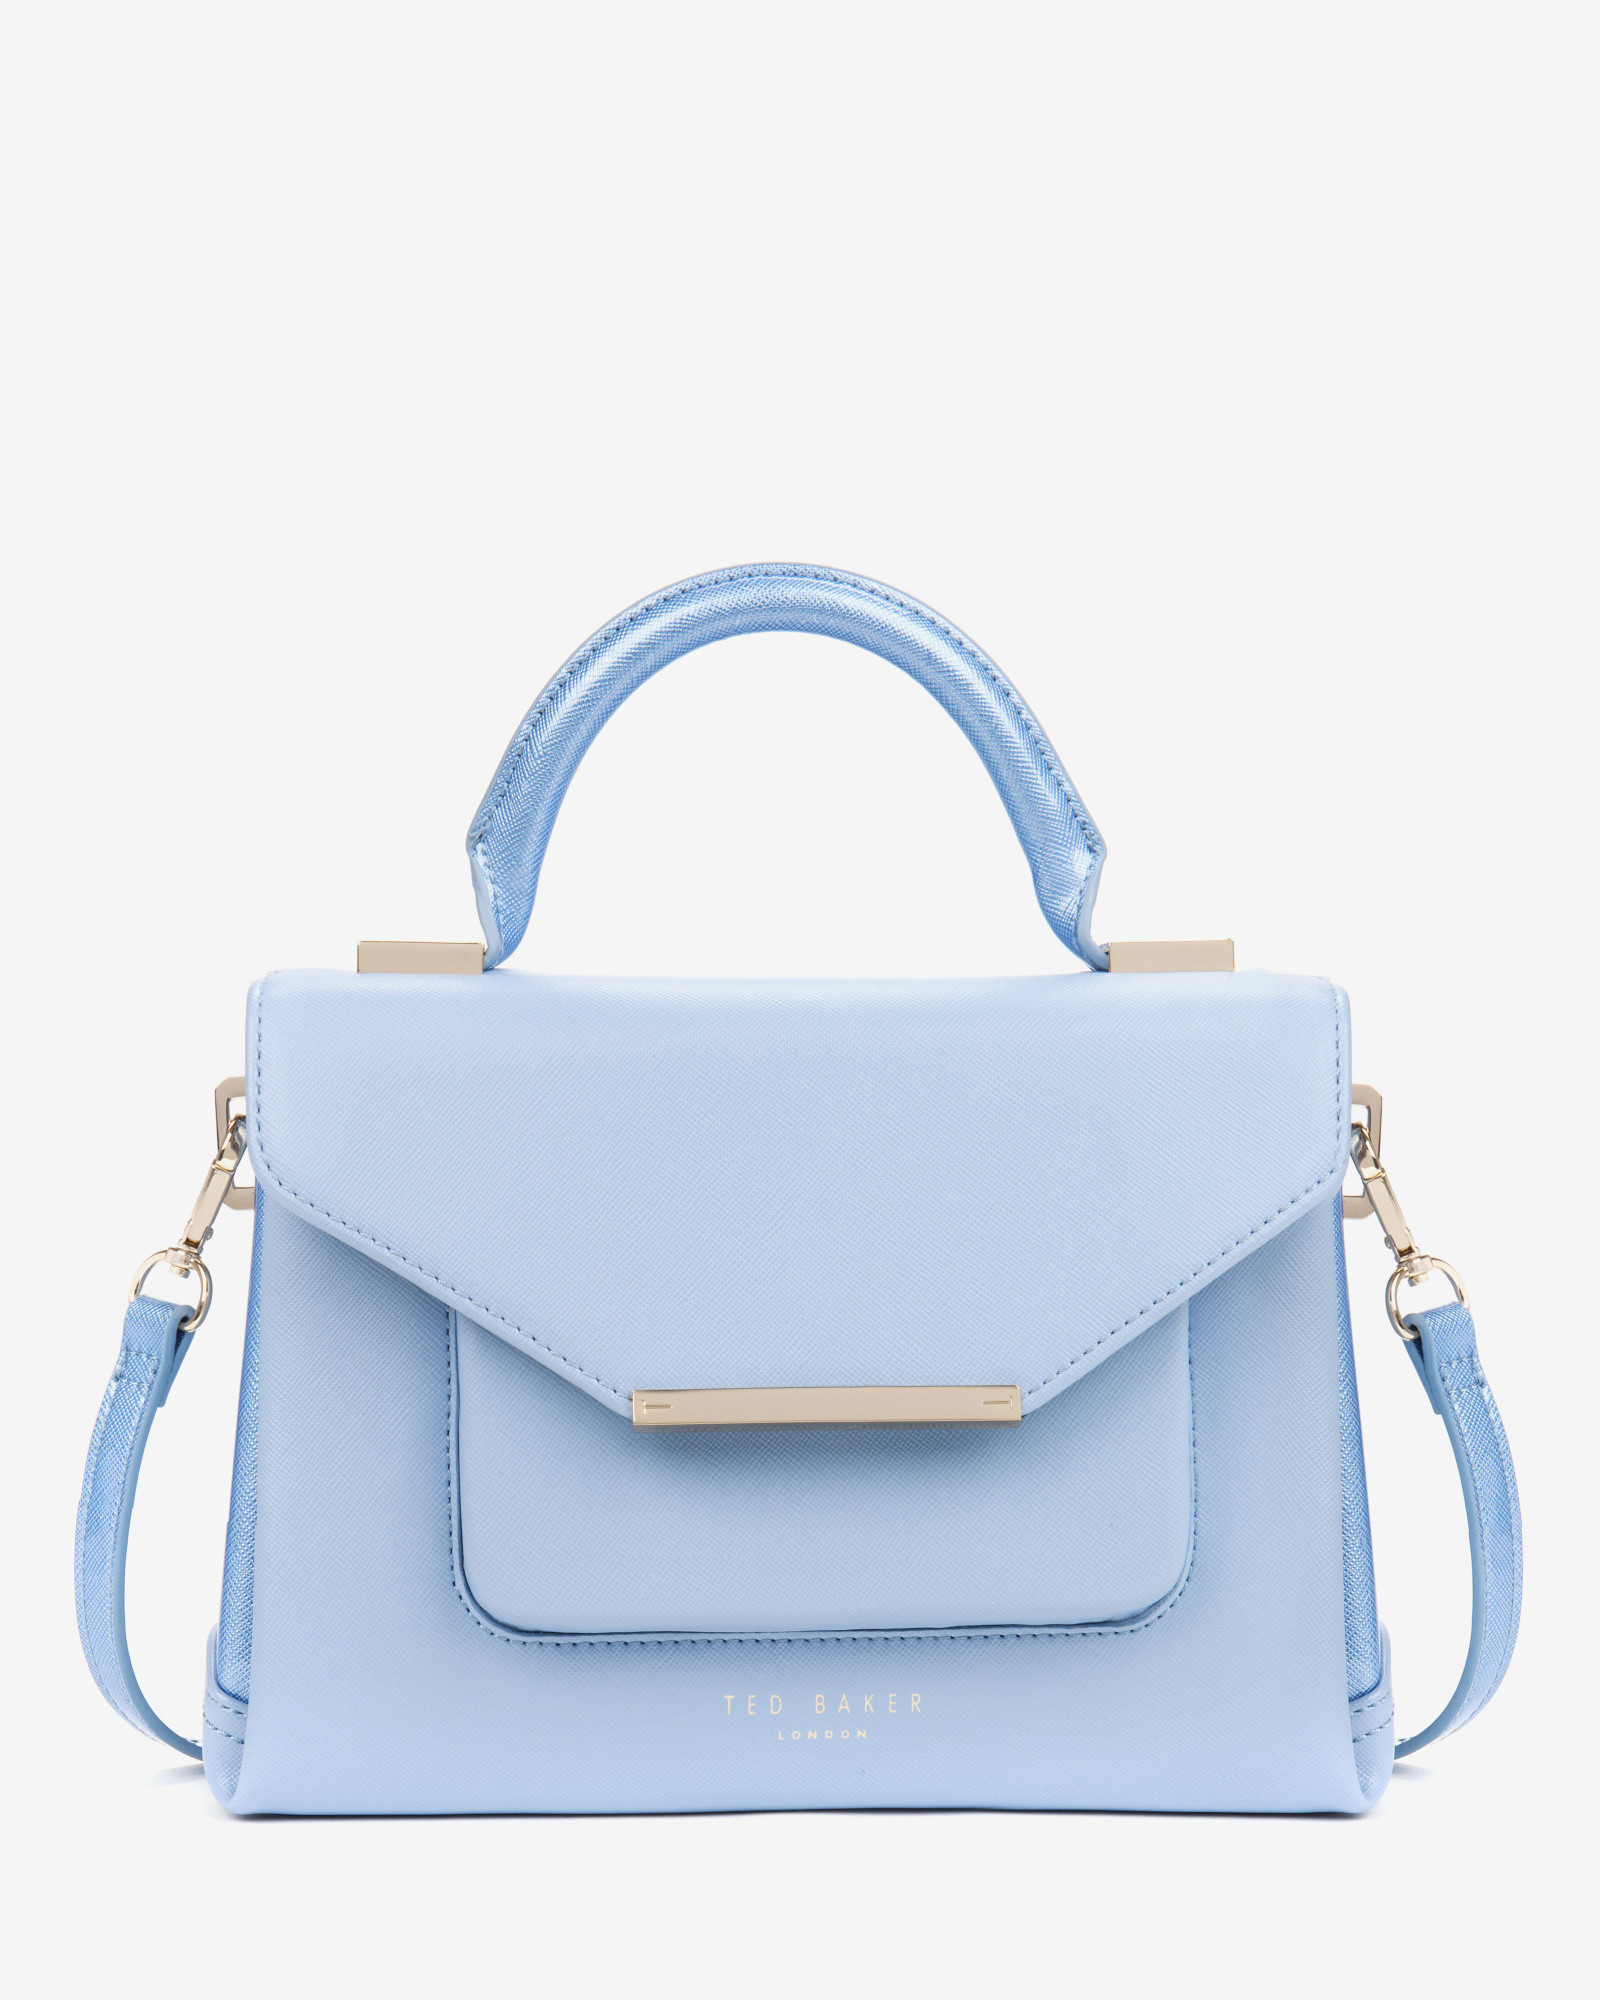 Bedachtzaam Prematuur Afstotend Ted Baker Mariza Crosshatch Lady Bag in Blue | Lyst